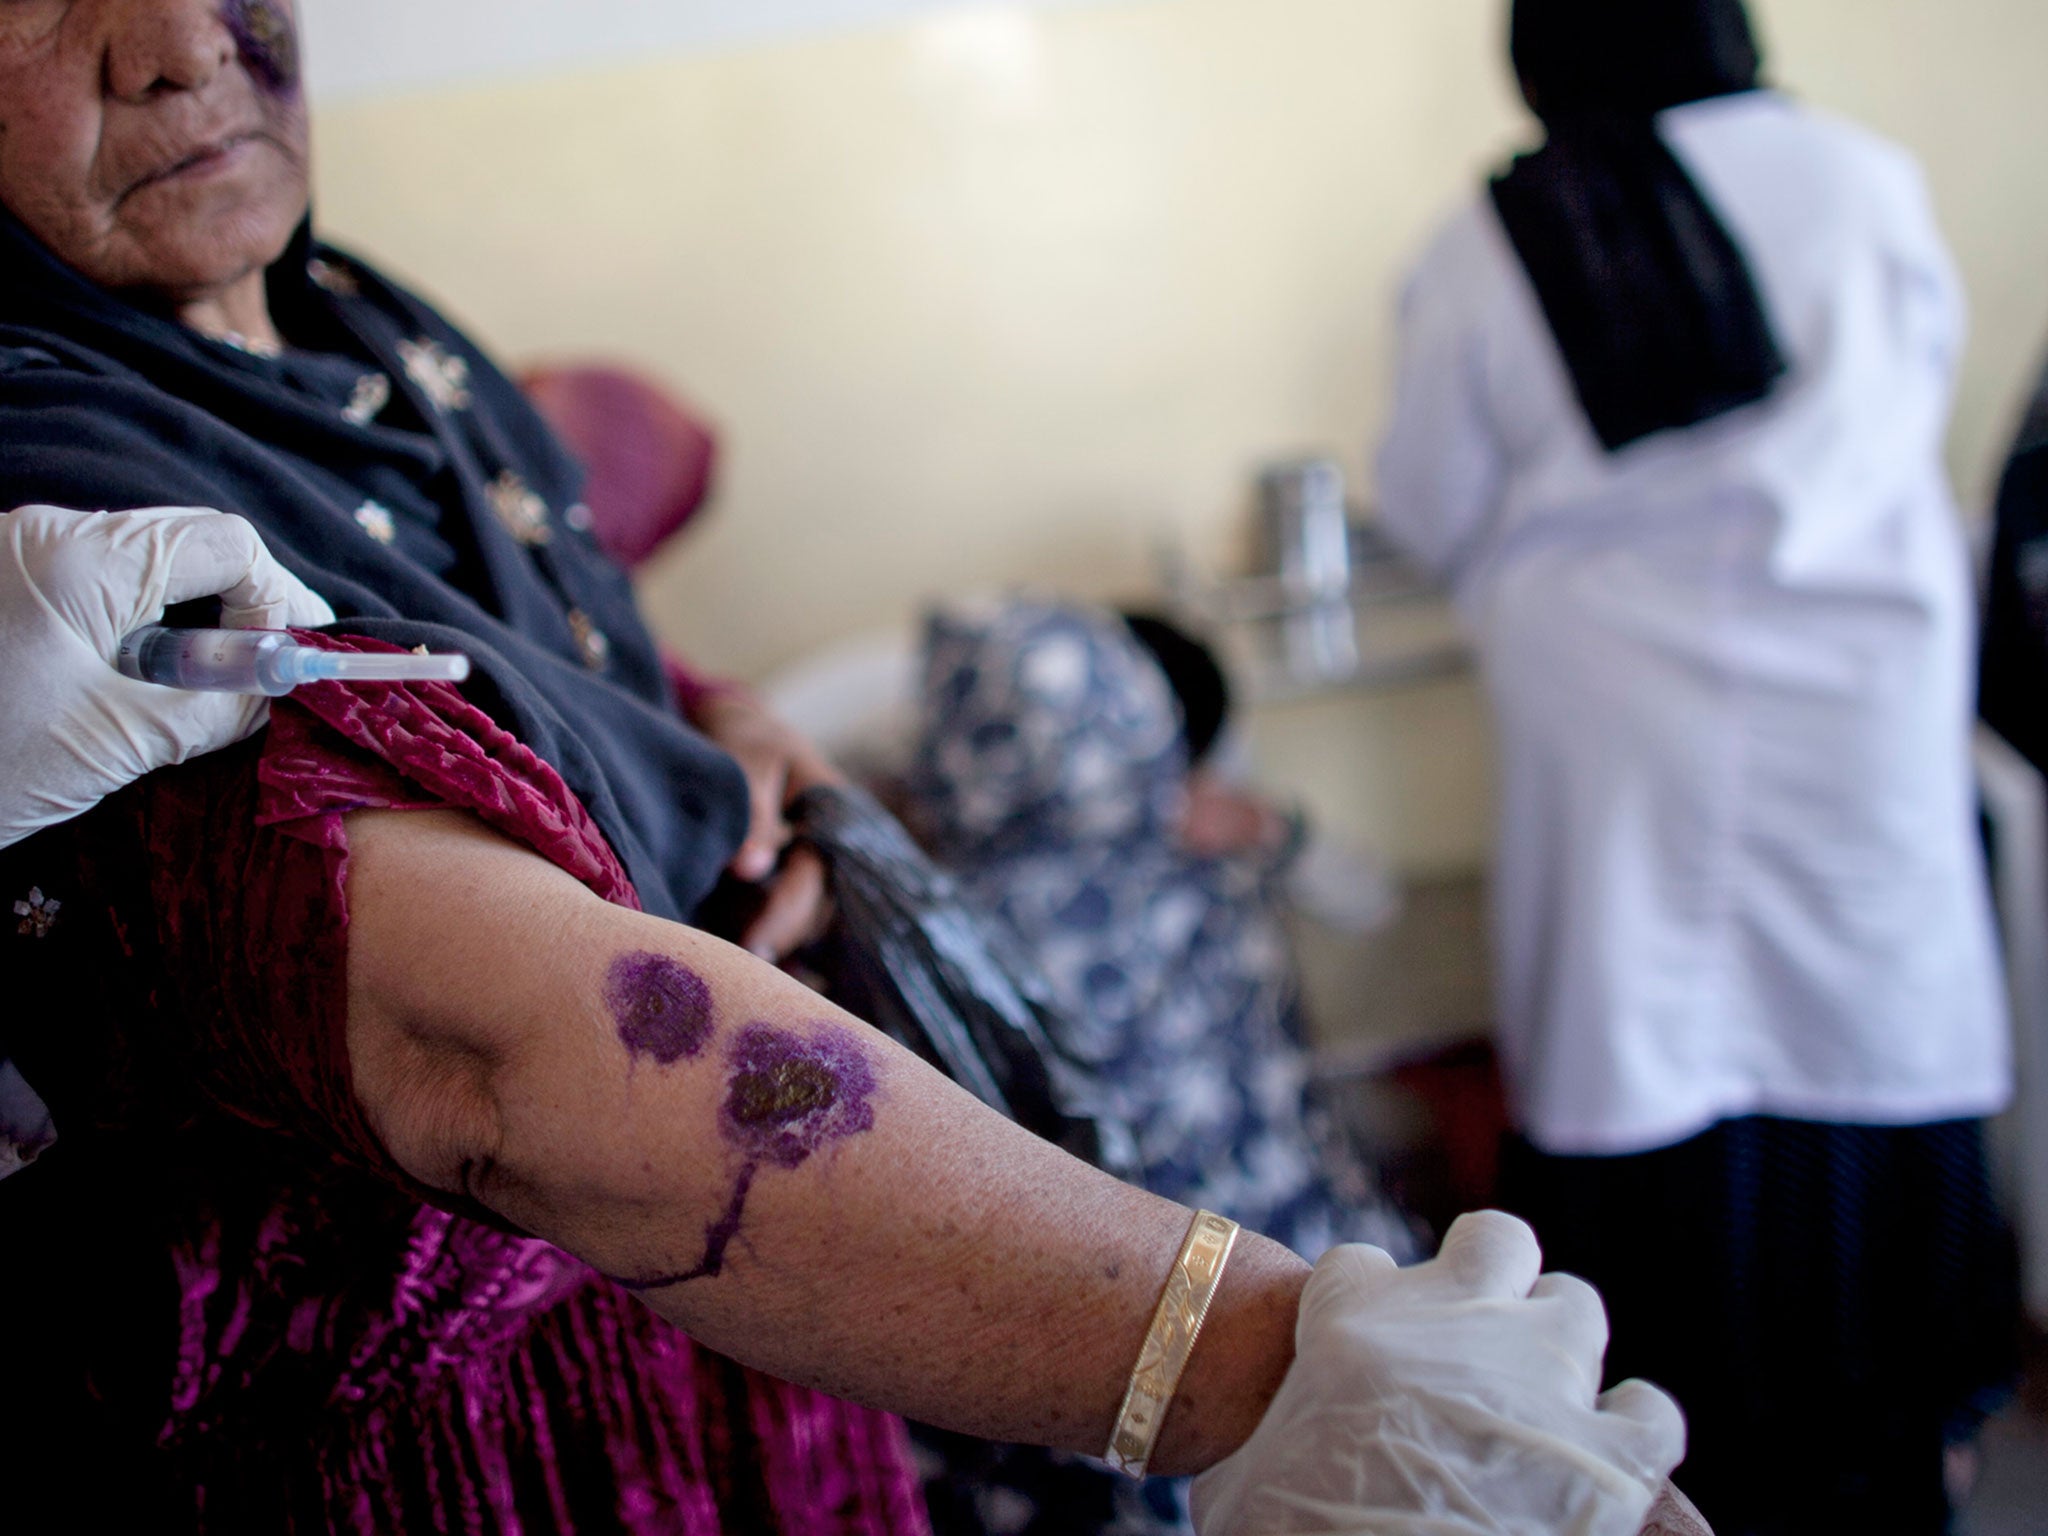 A woman shows signs of the condition on her arm